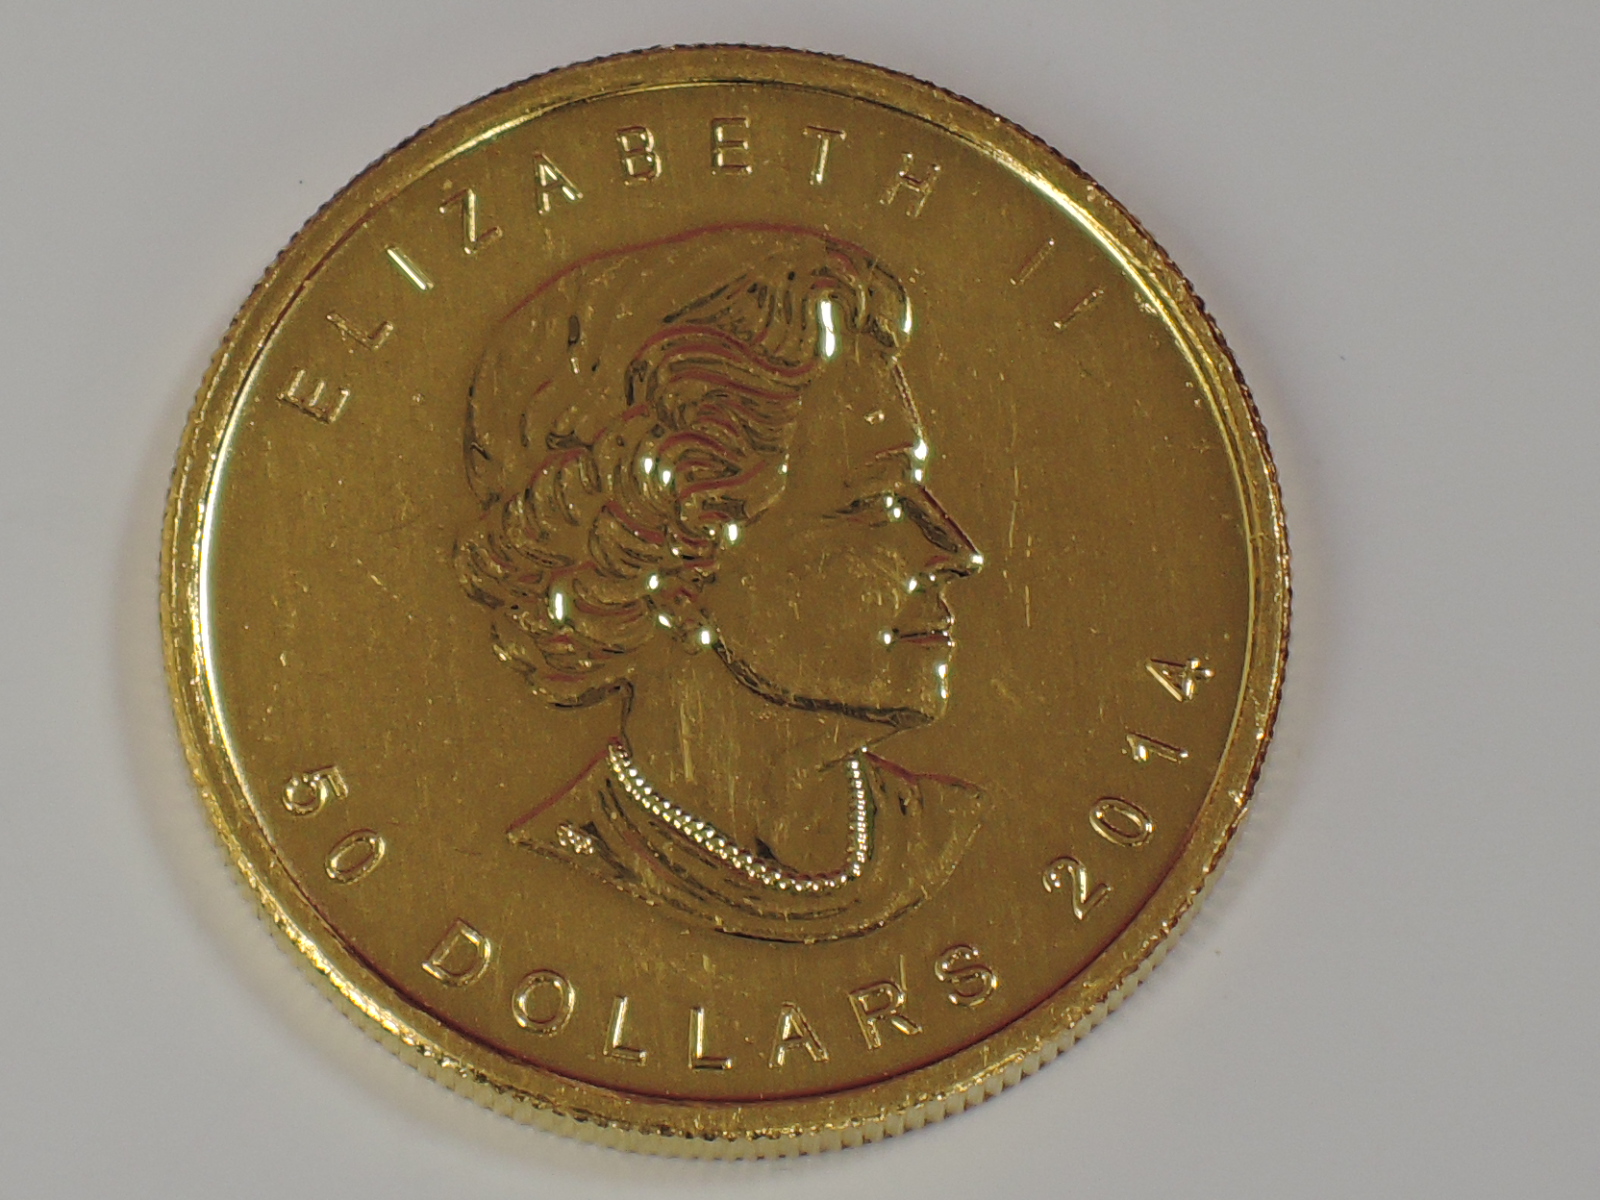 A gold 1oz 2014 Canada 50 dollar Maple leaf coin, in plastic case - Image 2 of 2